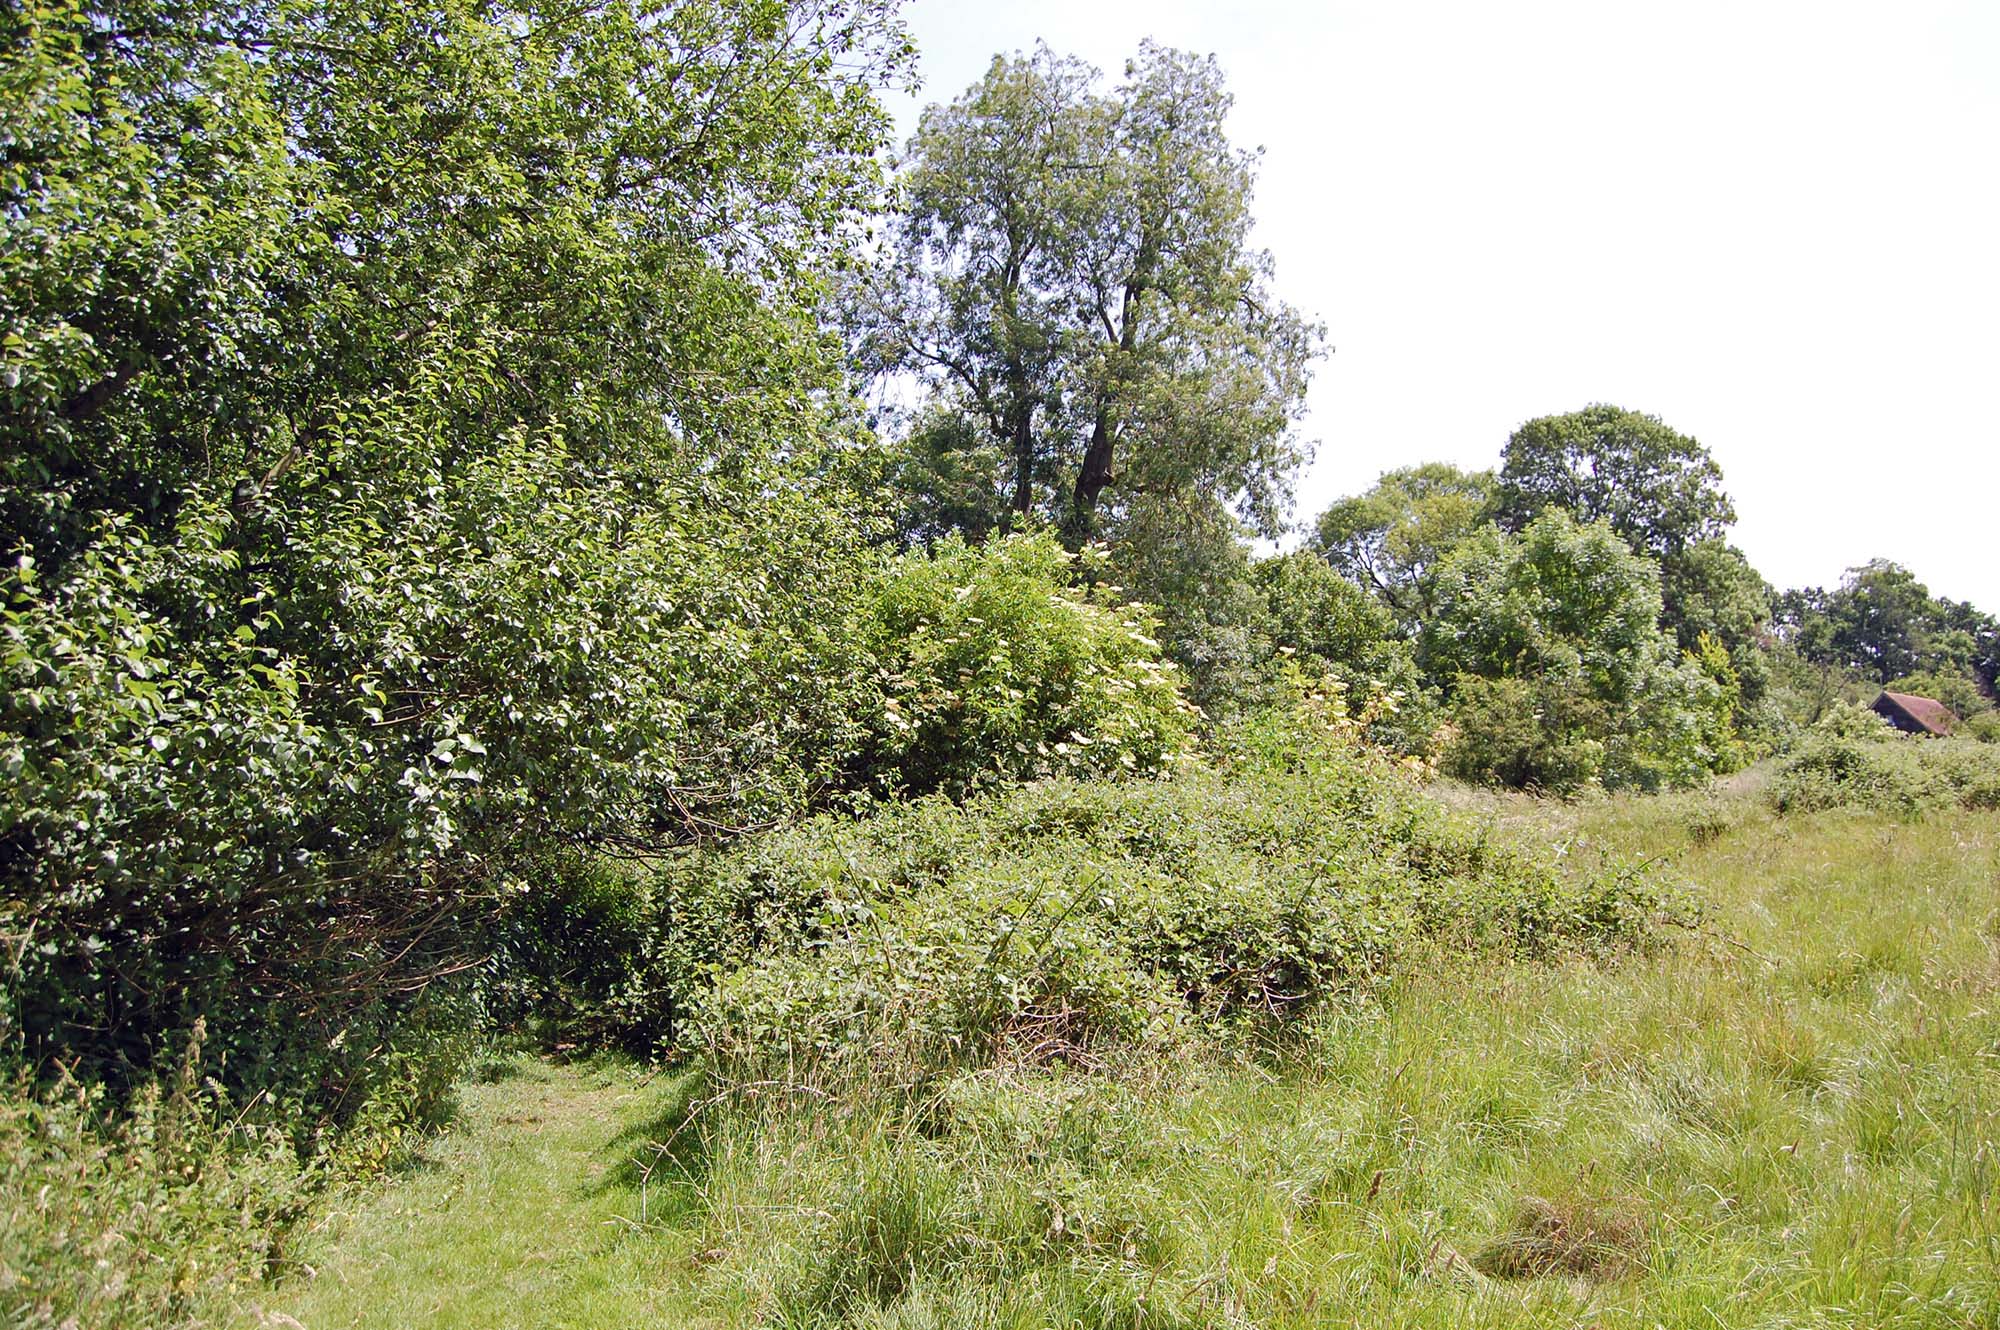 Trees, brambles and long grass with the roof of a house just visible at right